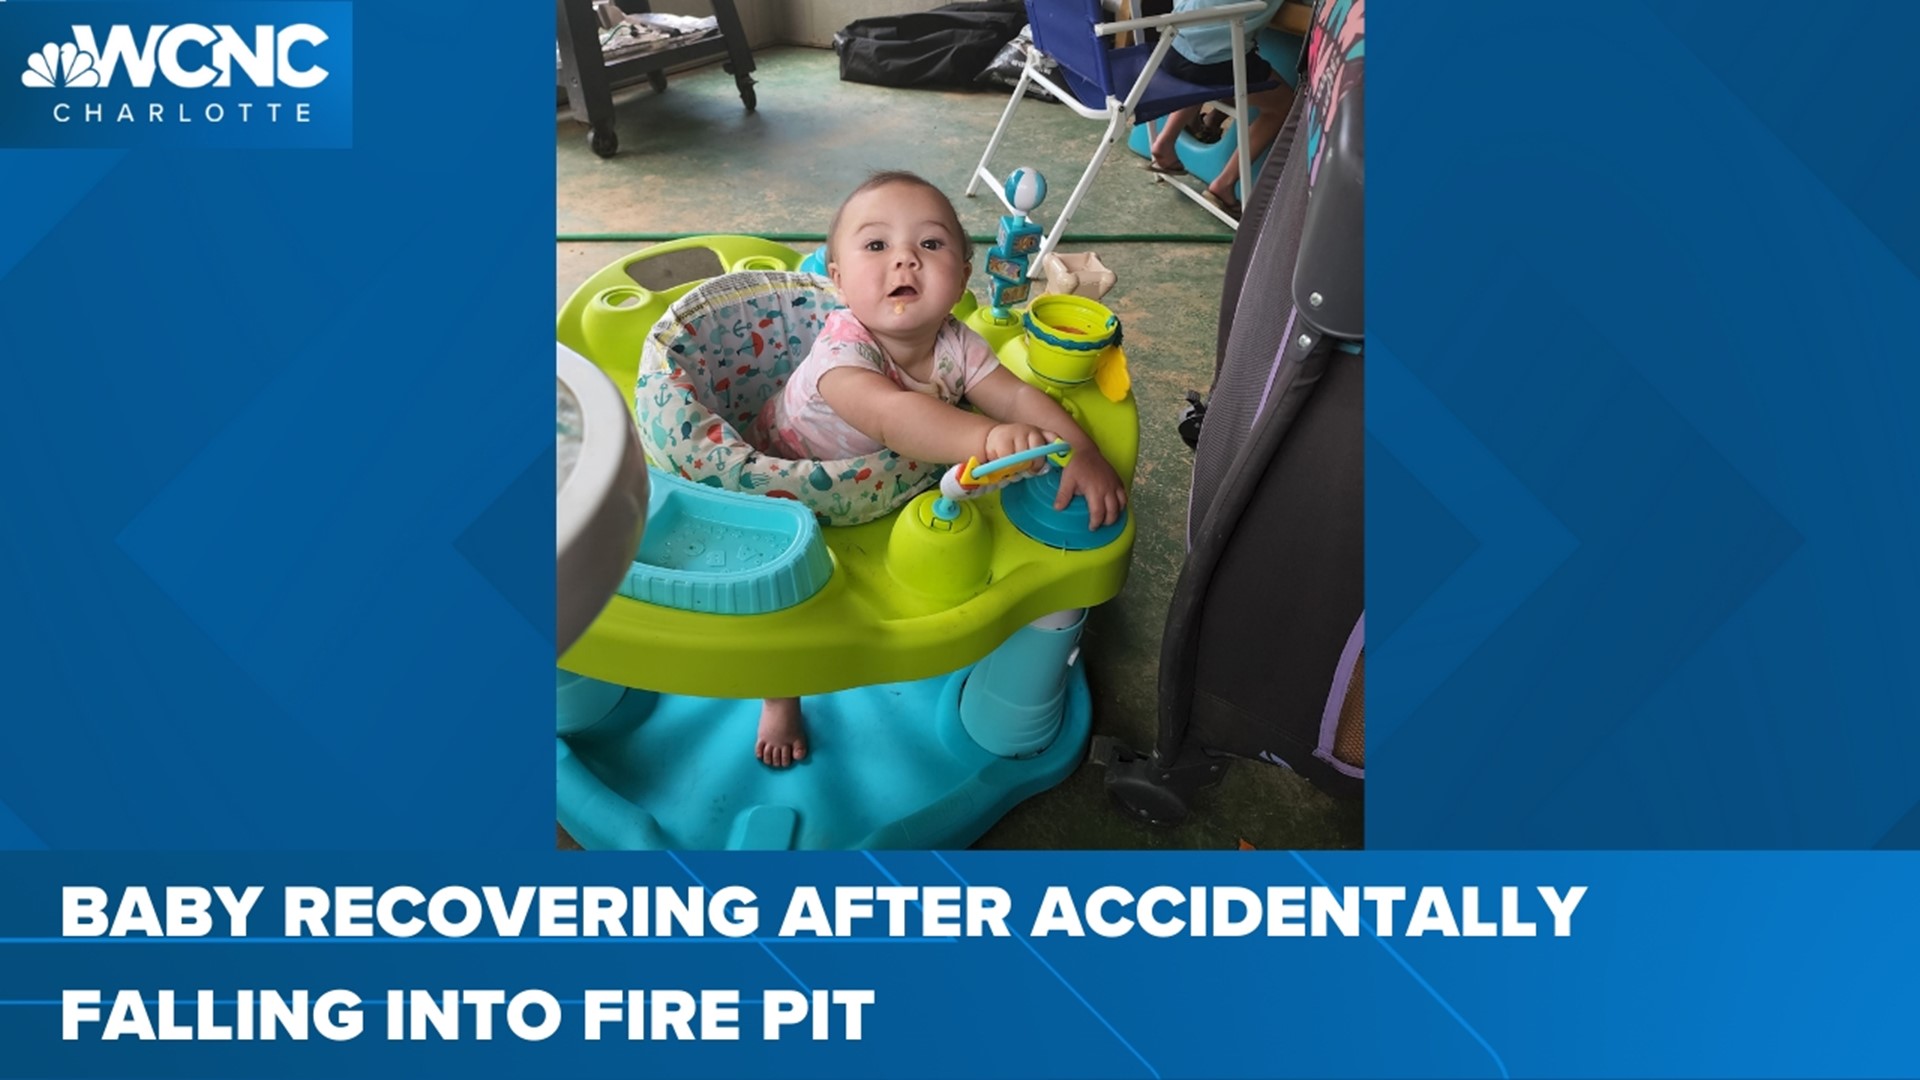 A 7-month-old baby girl is recovering in the hospital after falling into a fire pit and suffering second degree burns.